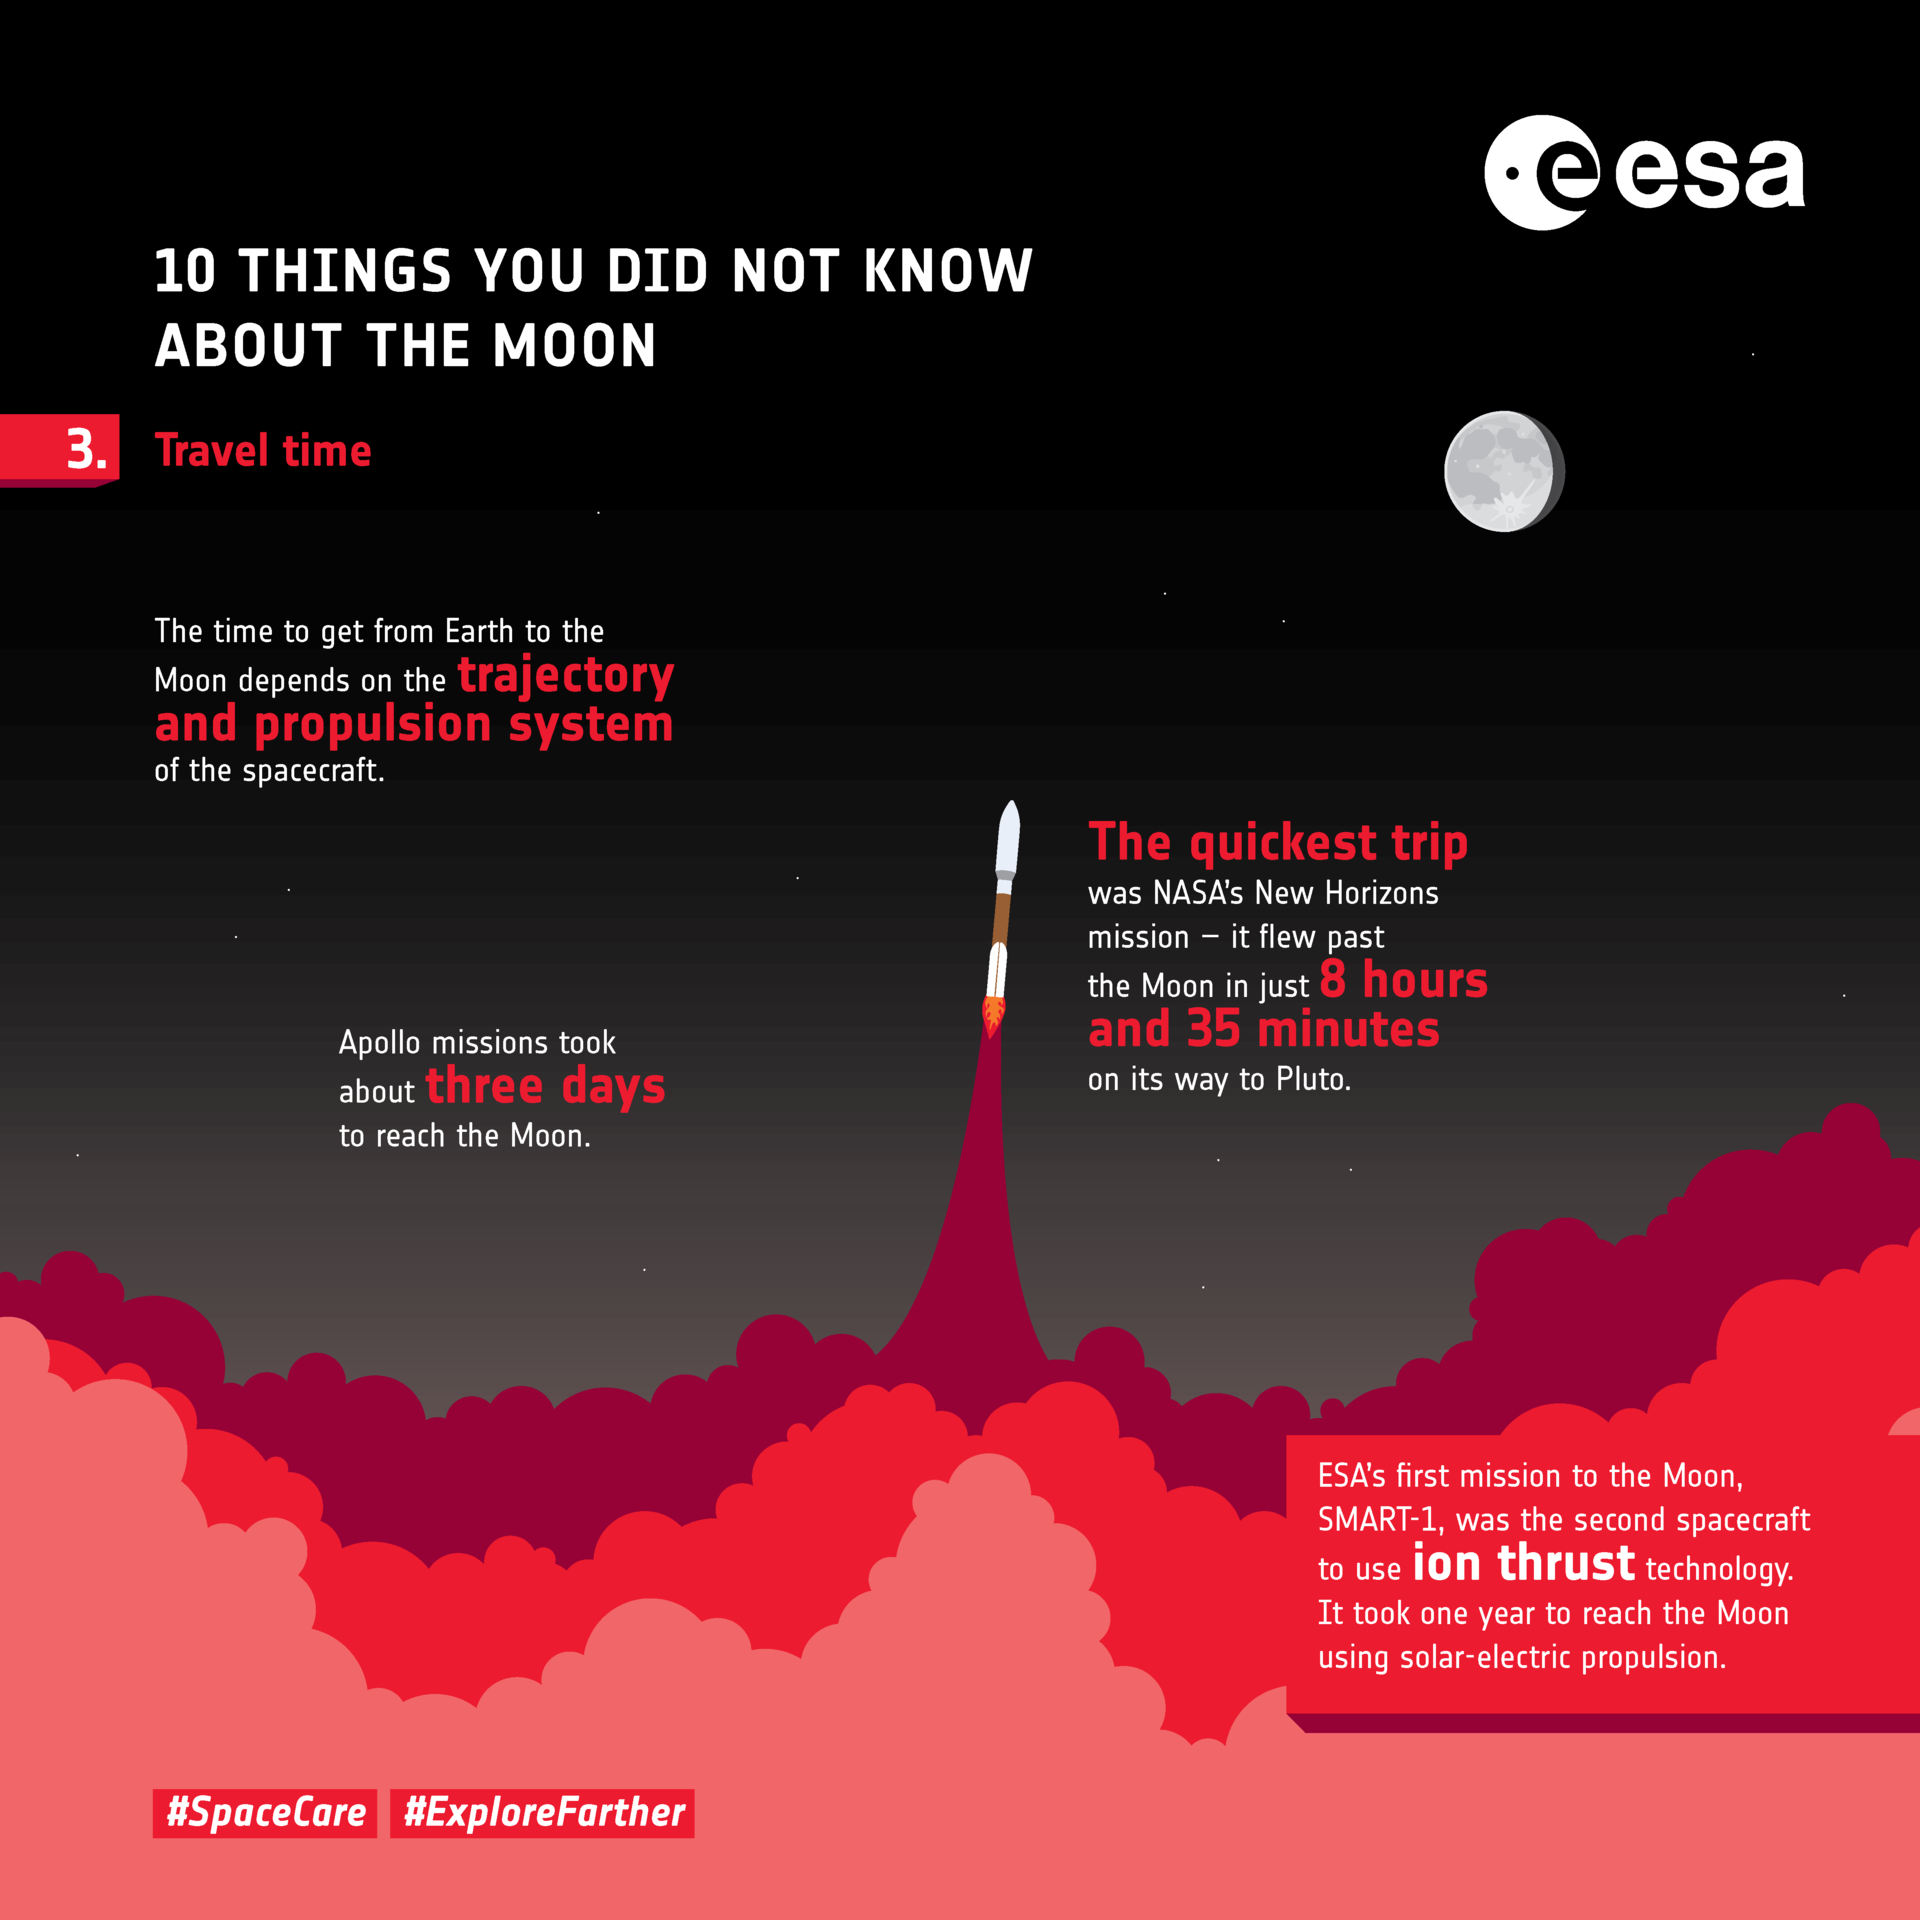 Ten things you did not know about the Moon: 3. Travel time